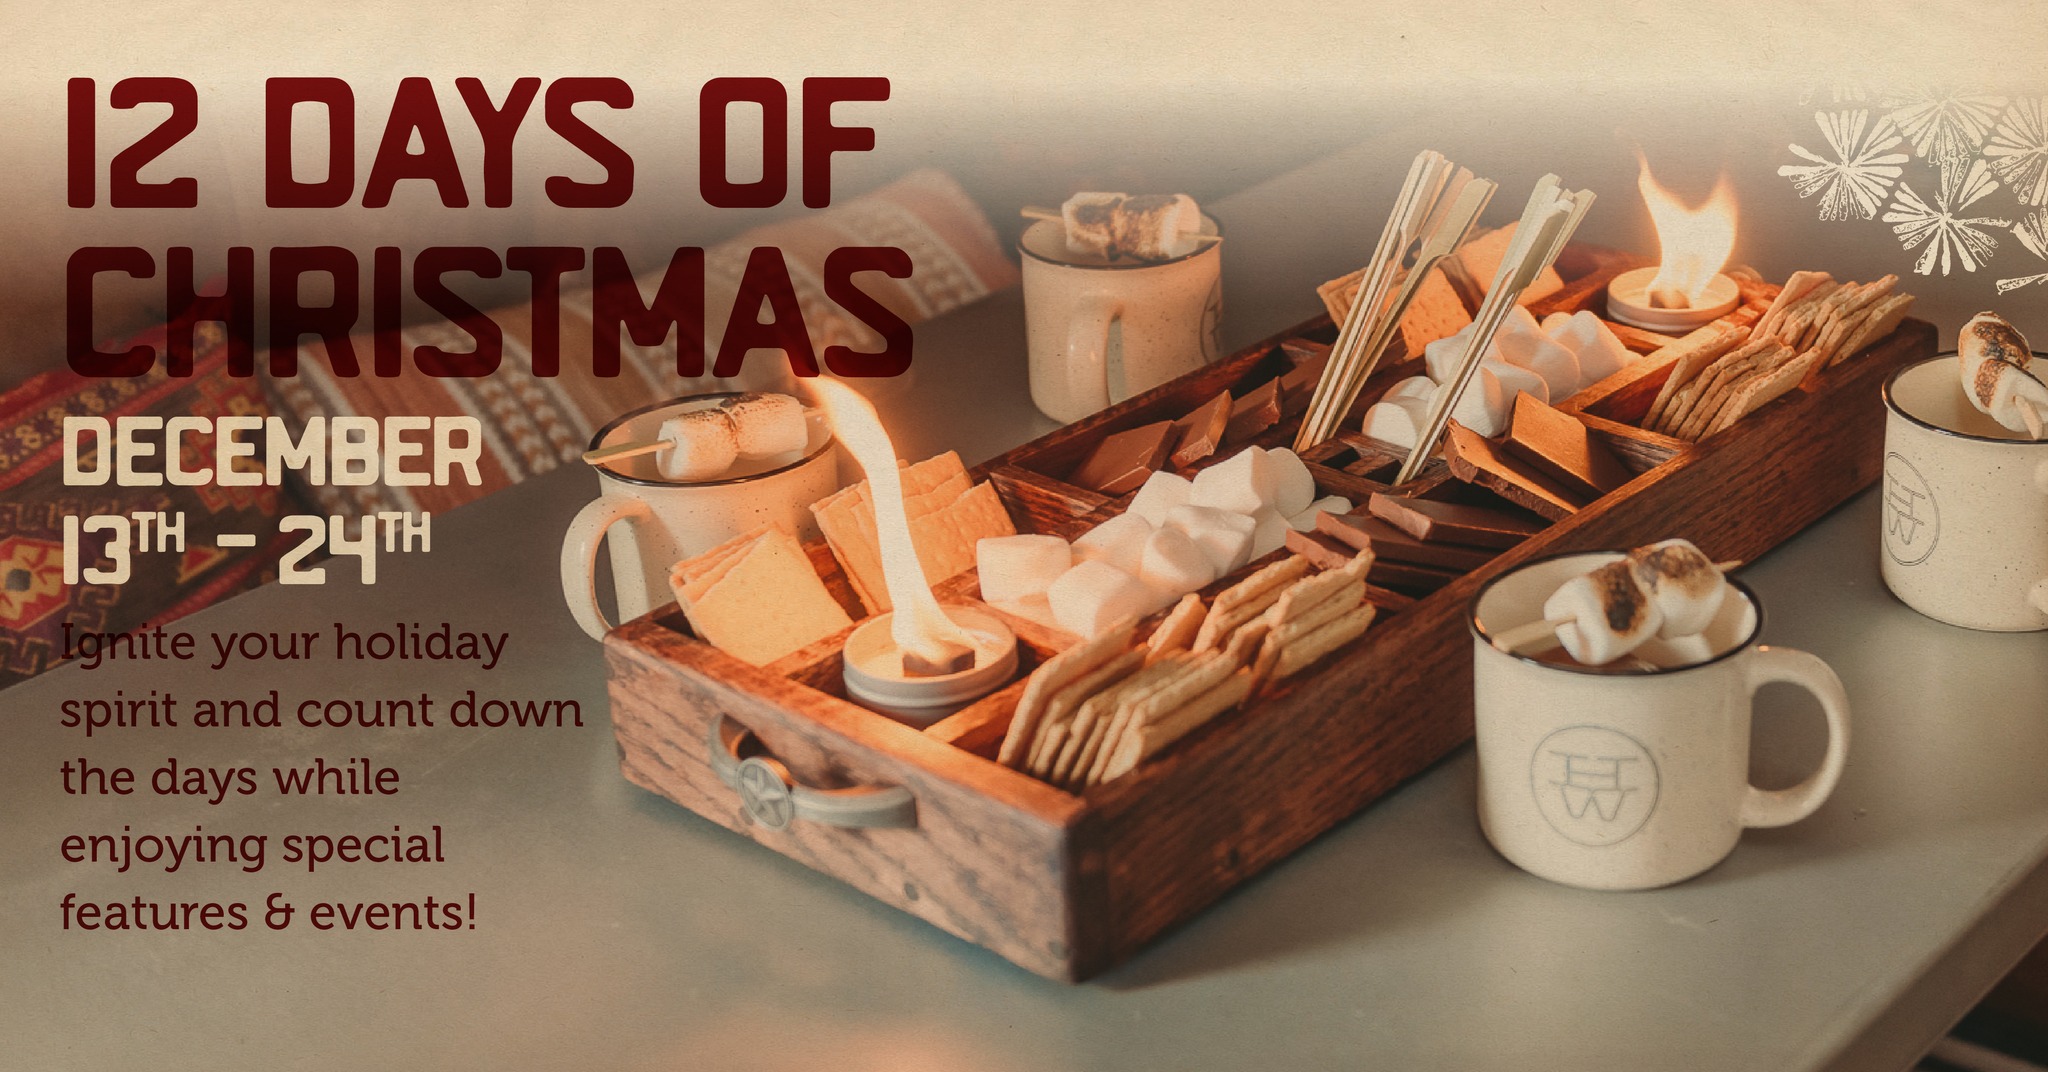 12 Days of Christmas at Haywire